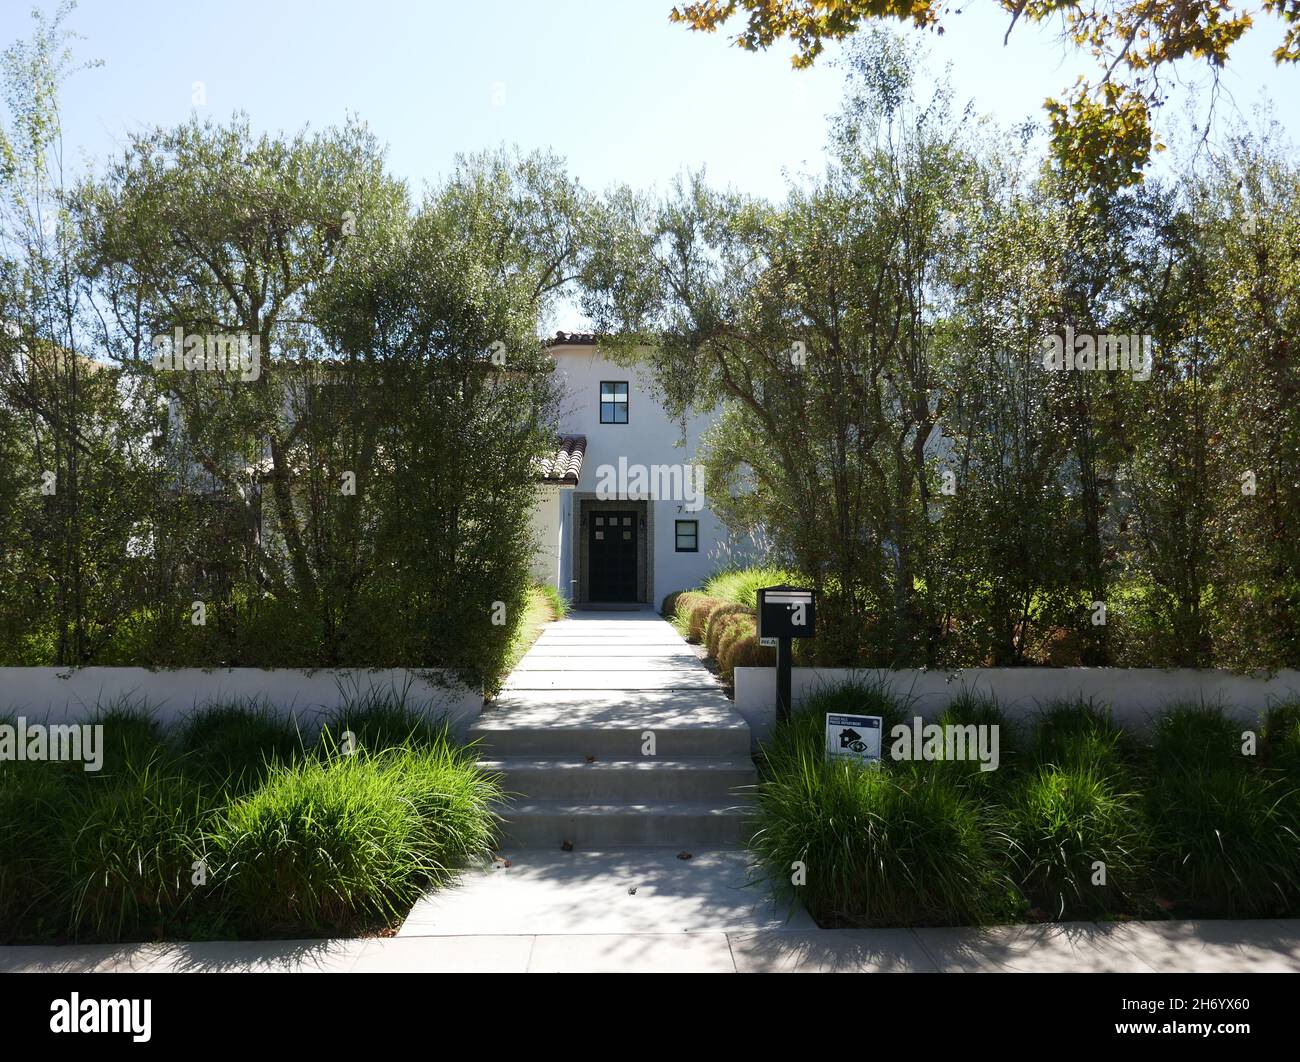 Beverly Hills, California, USA 18th September 2021 A general view of atmosphere of Actress Kim Delaney and Actress Joan Benny's Former Home/house at 711 Walden Drive on September 18, 2021 in Beverly Hills, California, USA. Photo by Barry King/Alamy Stock Photo Stock Photo